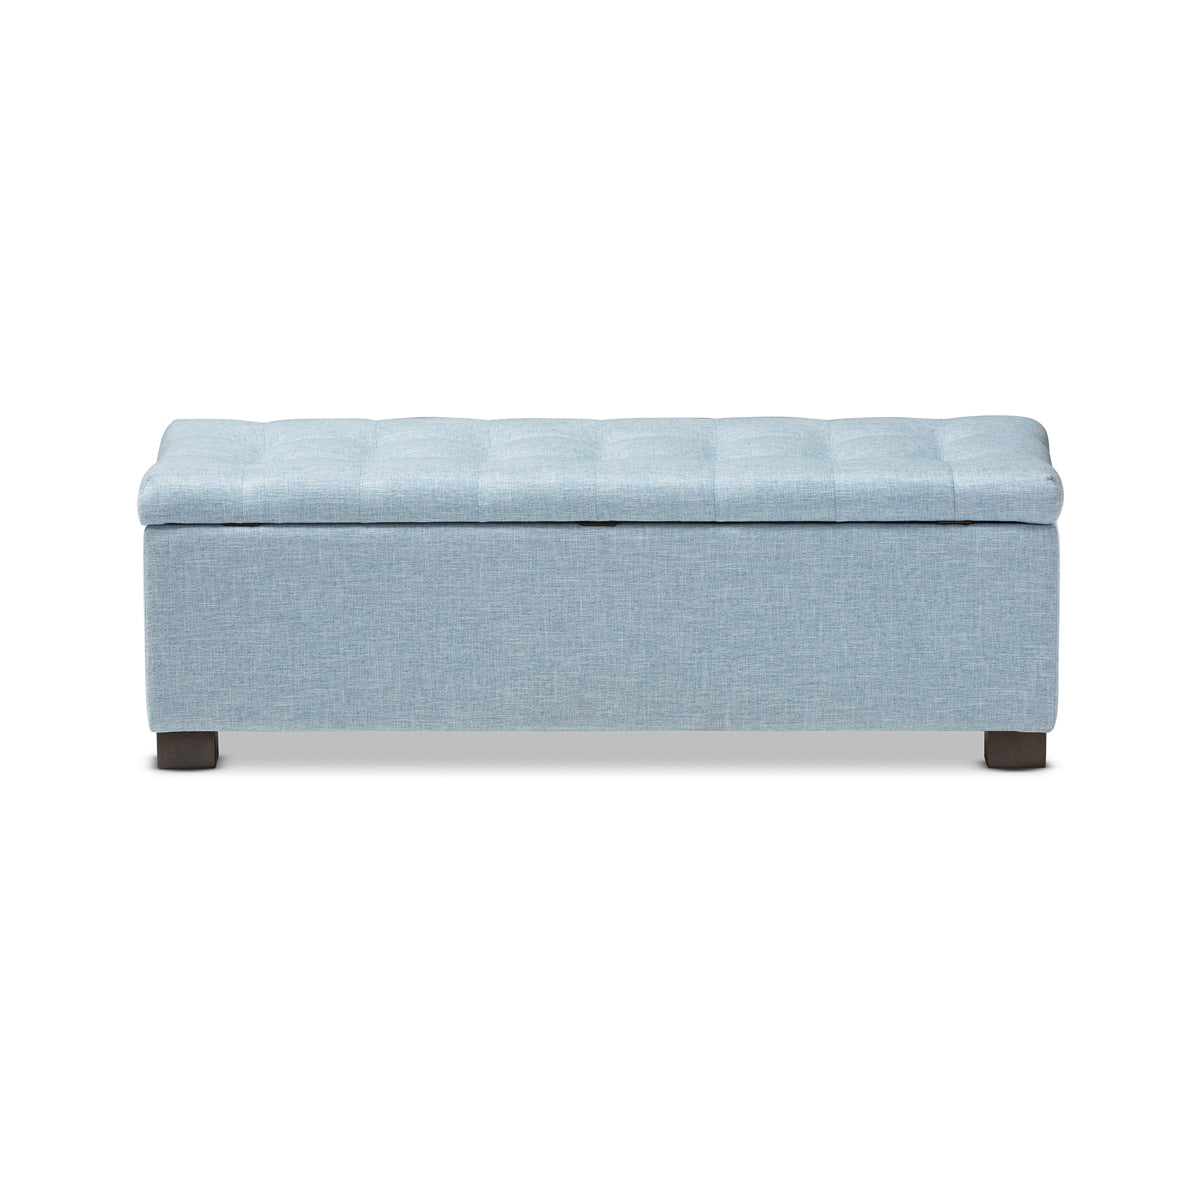 Baxton Studio Roanoke Modern and Contemporary Light Blue Fabric Upholstered Grid-Tufting Storage Ottoman Bench Baxton Studio-benches-Minimal And Modern - 6